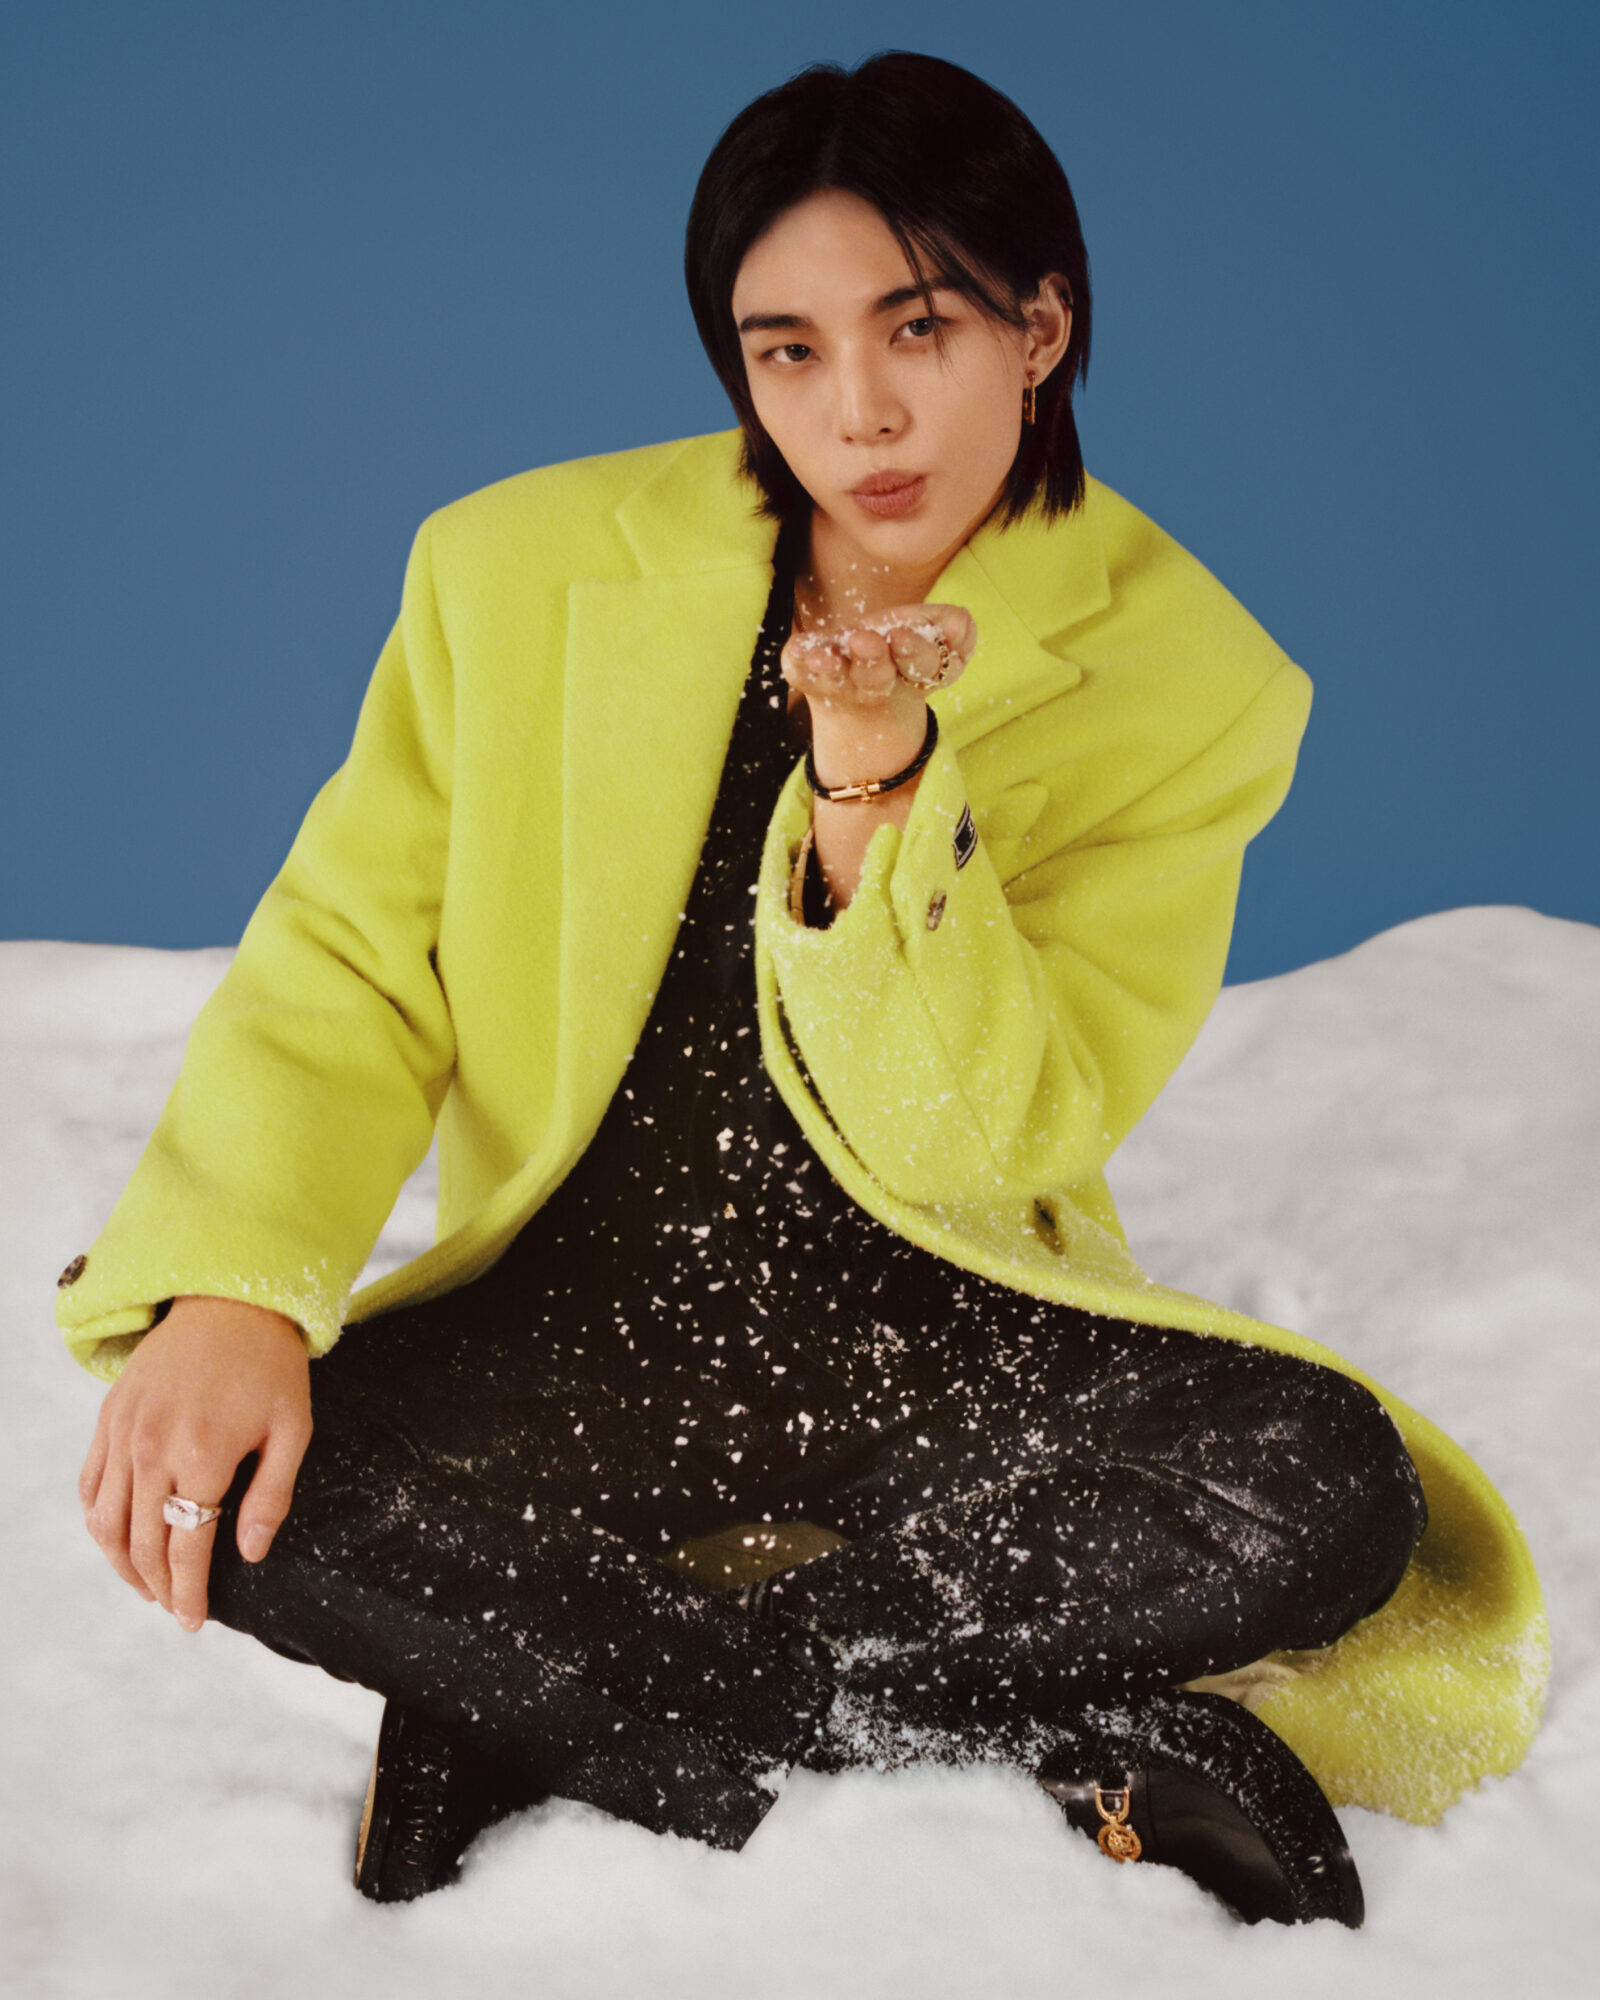 A splash of neon in the snow: Hyunjin dazzles in a vibrant Versace jacket, bringing warmth to the winter scene.